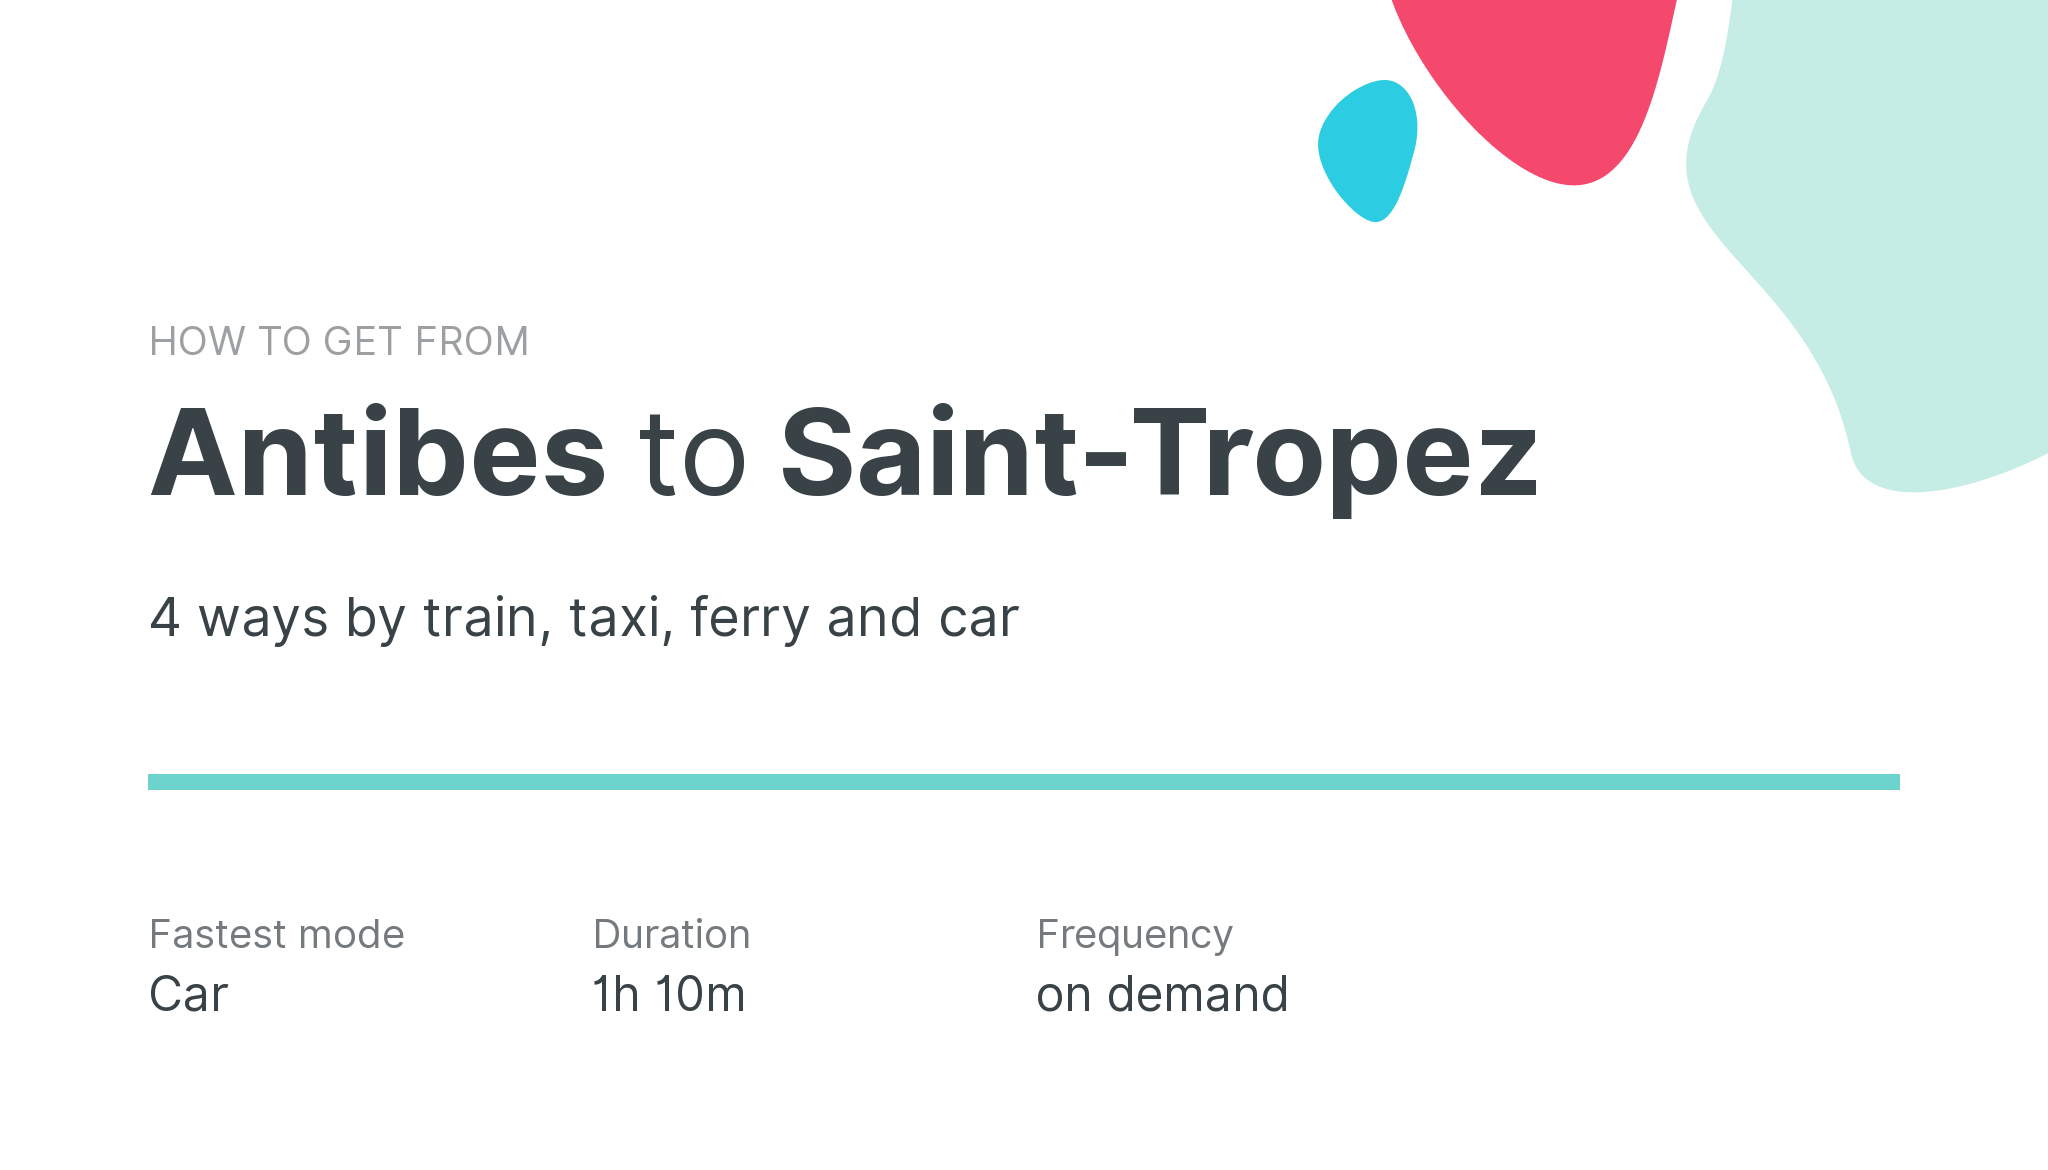 How do I get from Antibes to Saint-Tropez